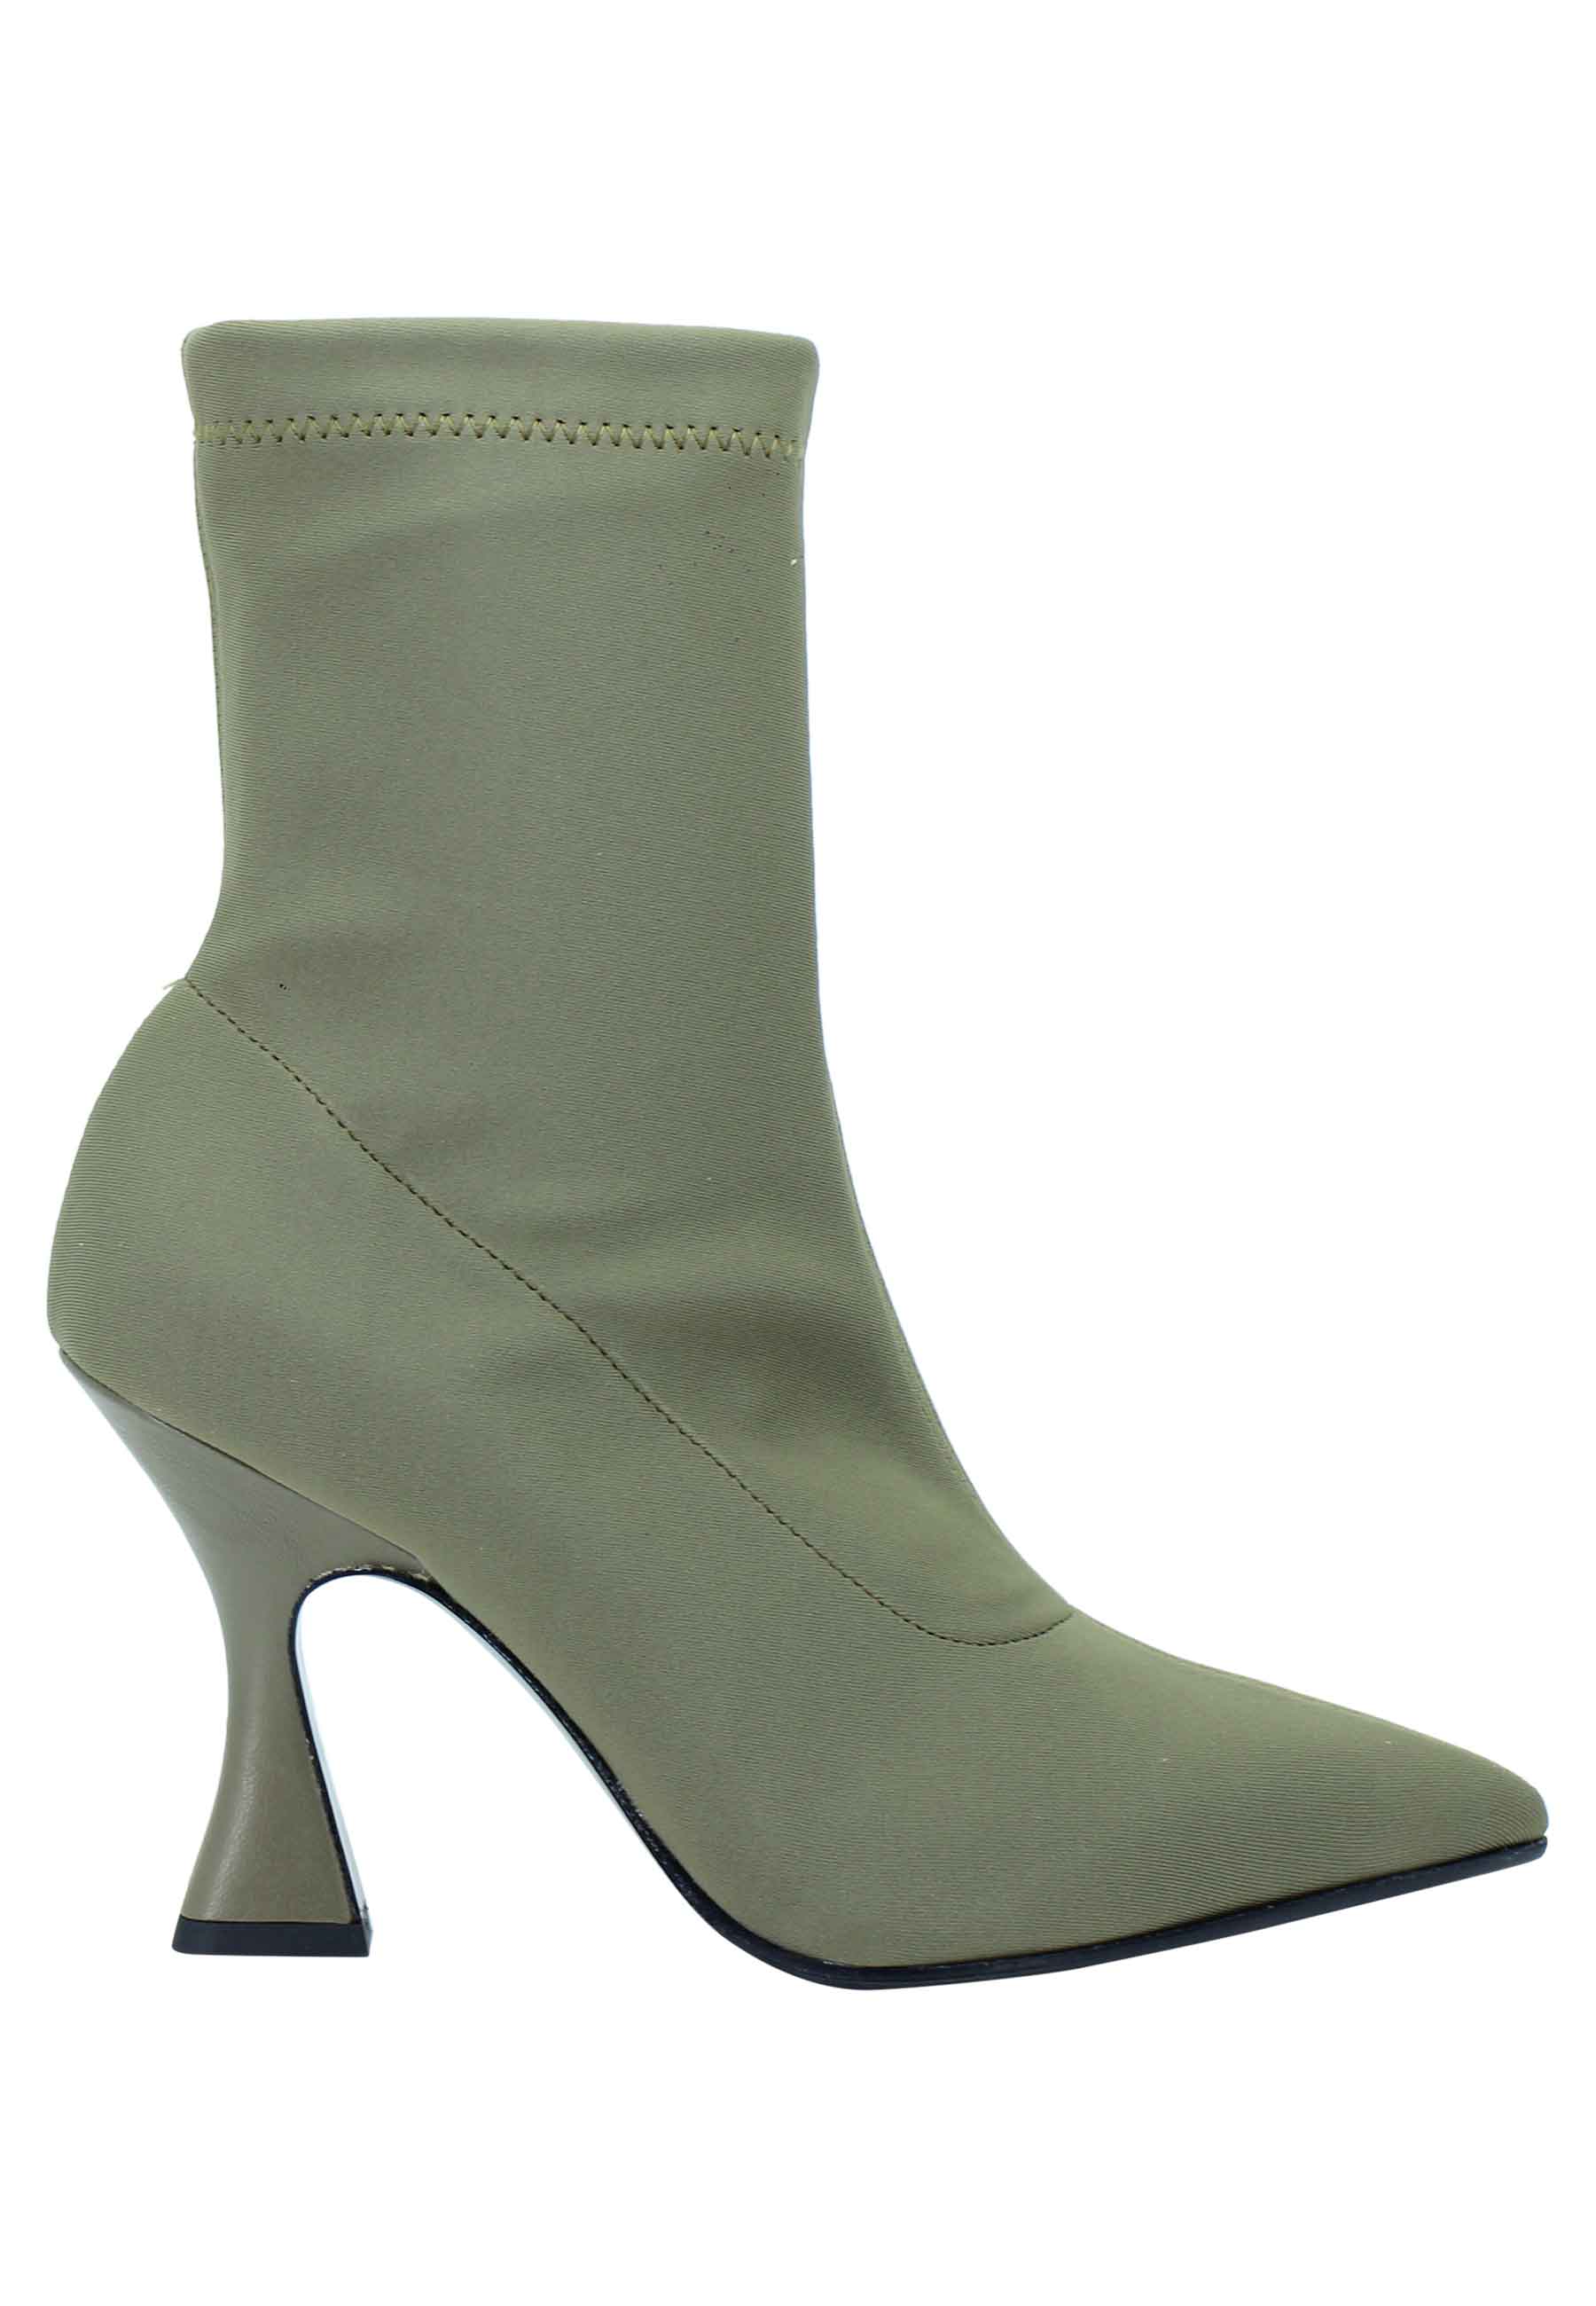 Women's ankle boots in military stretch fabric, high heel, pointed toe